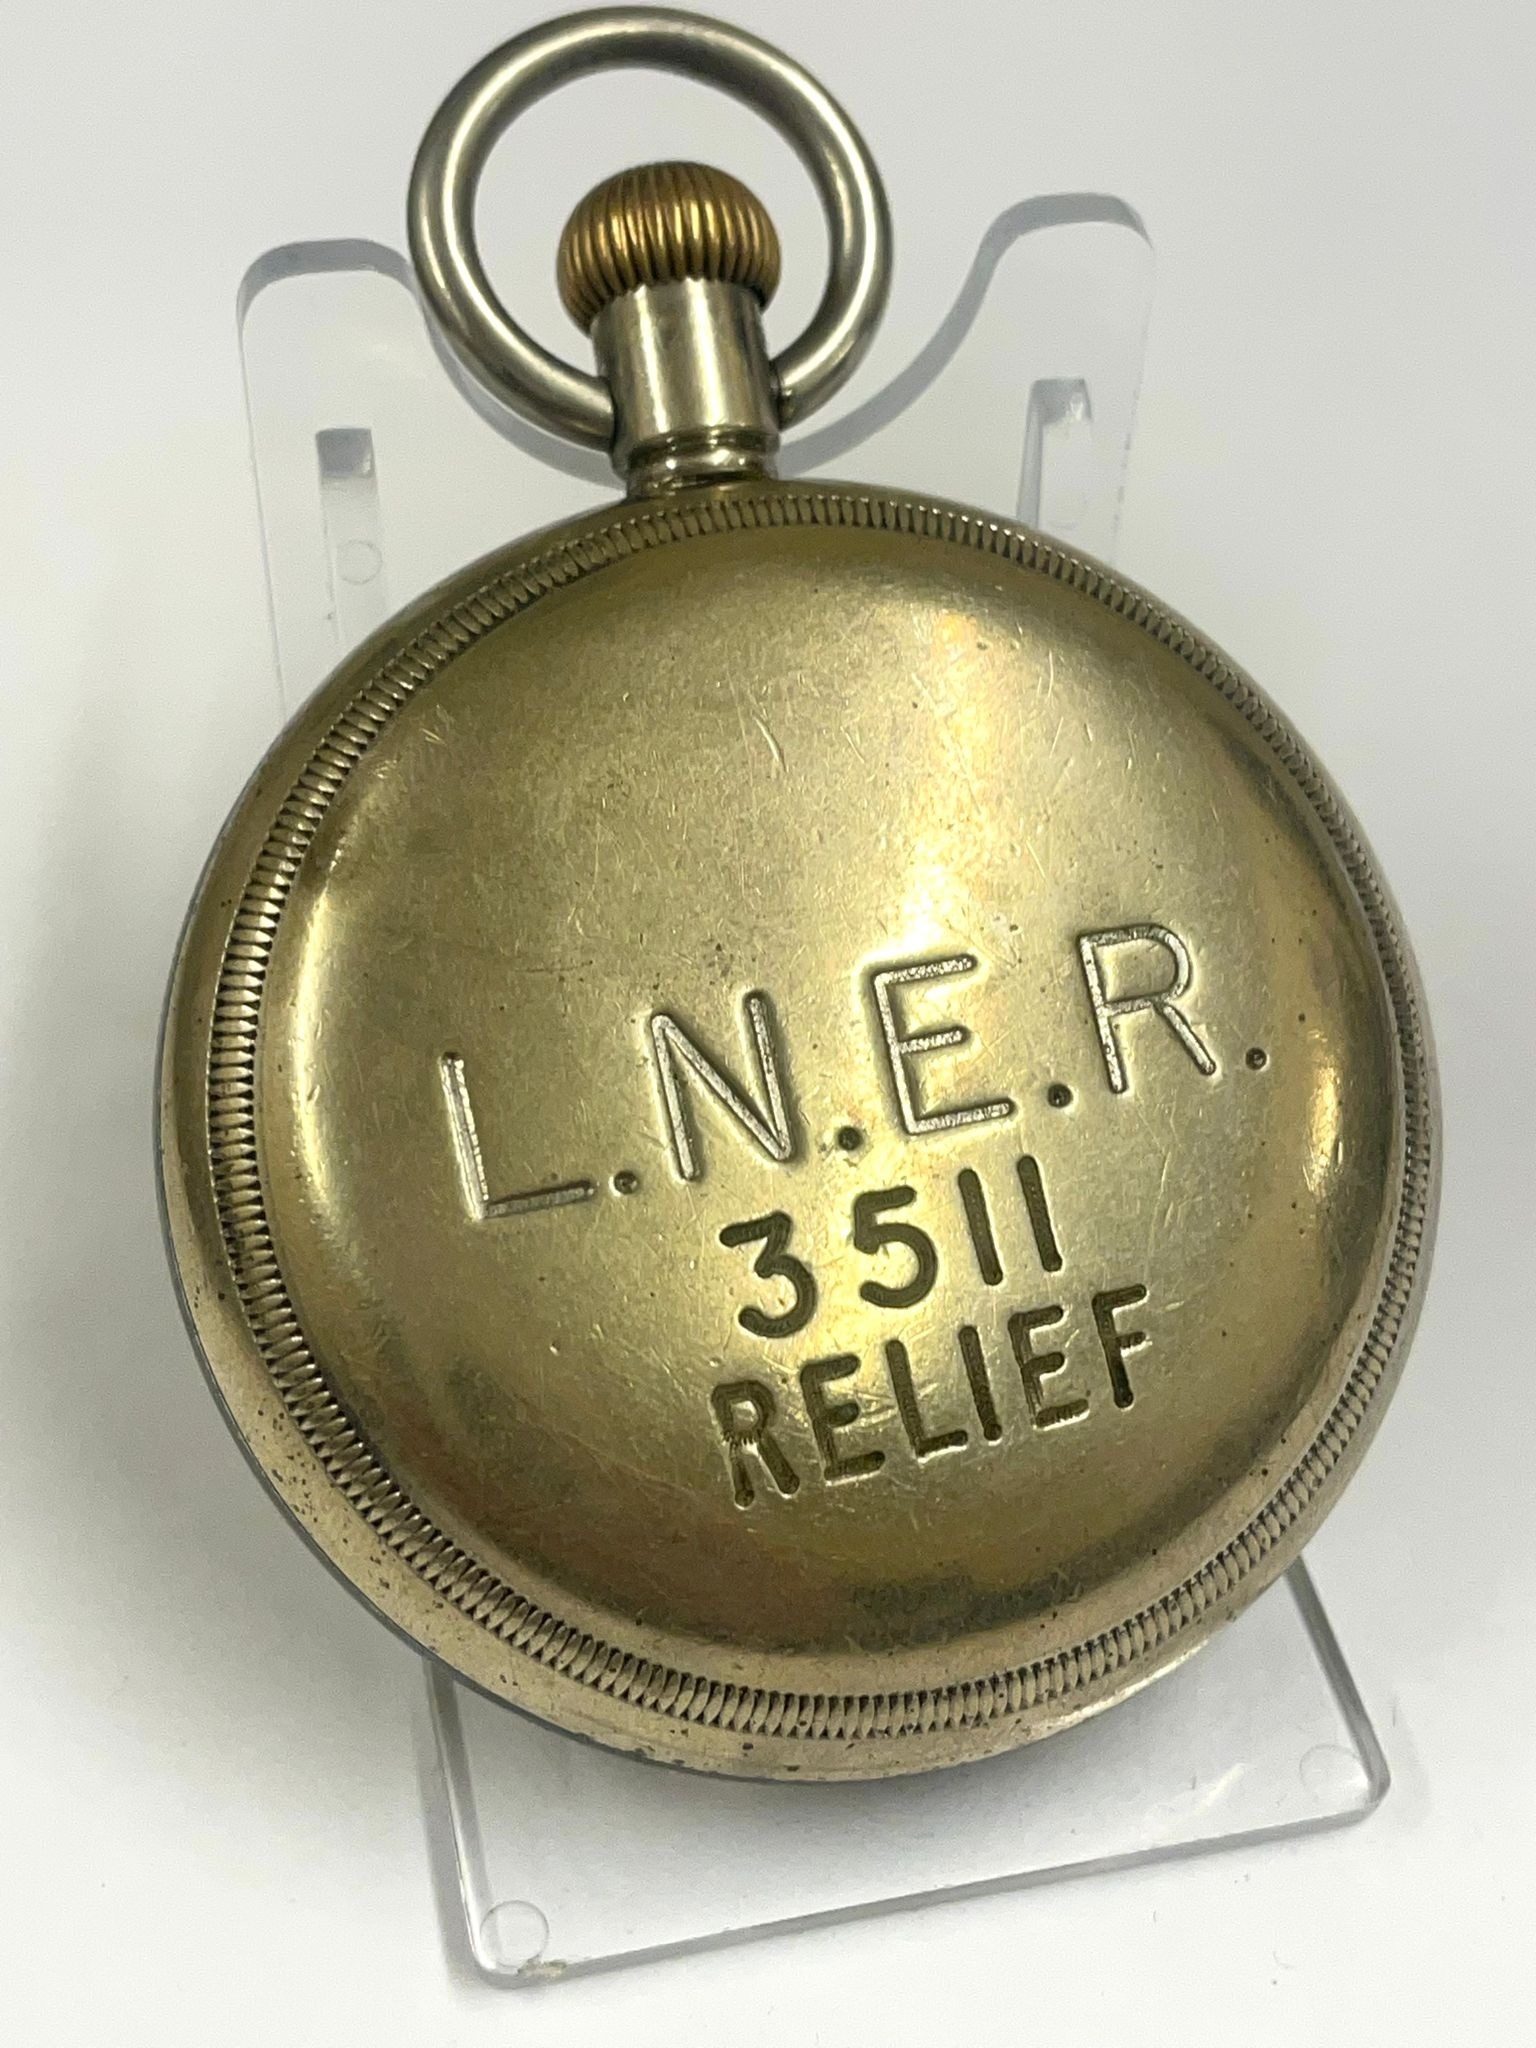 Vintage Railway pocket watch ticks , sold as found. - Image 2 of 3